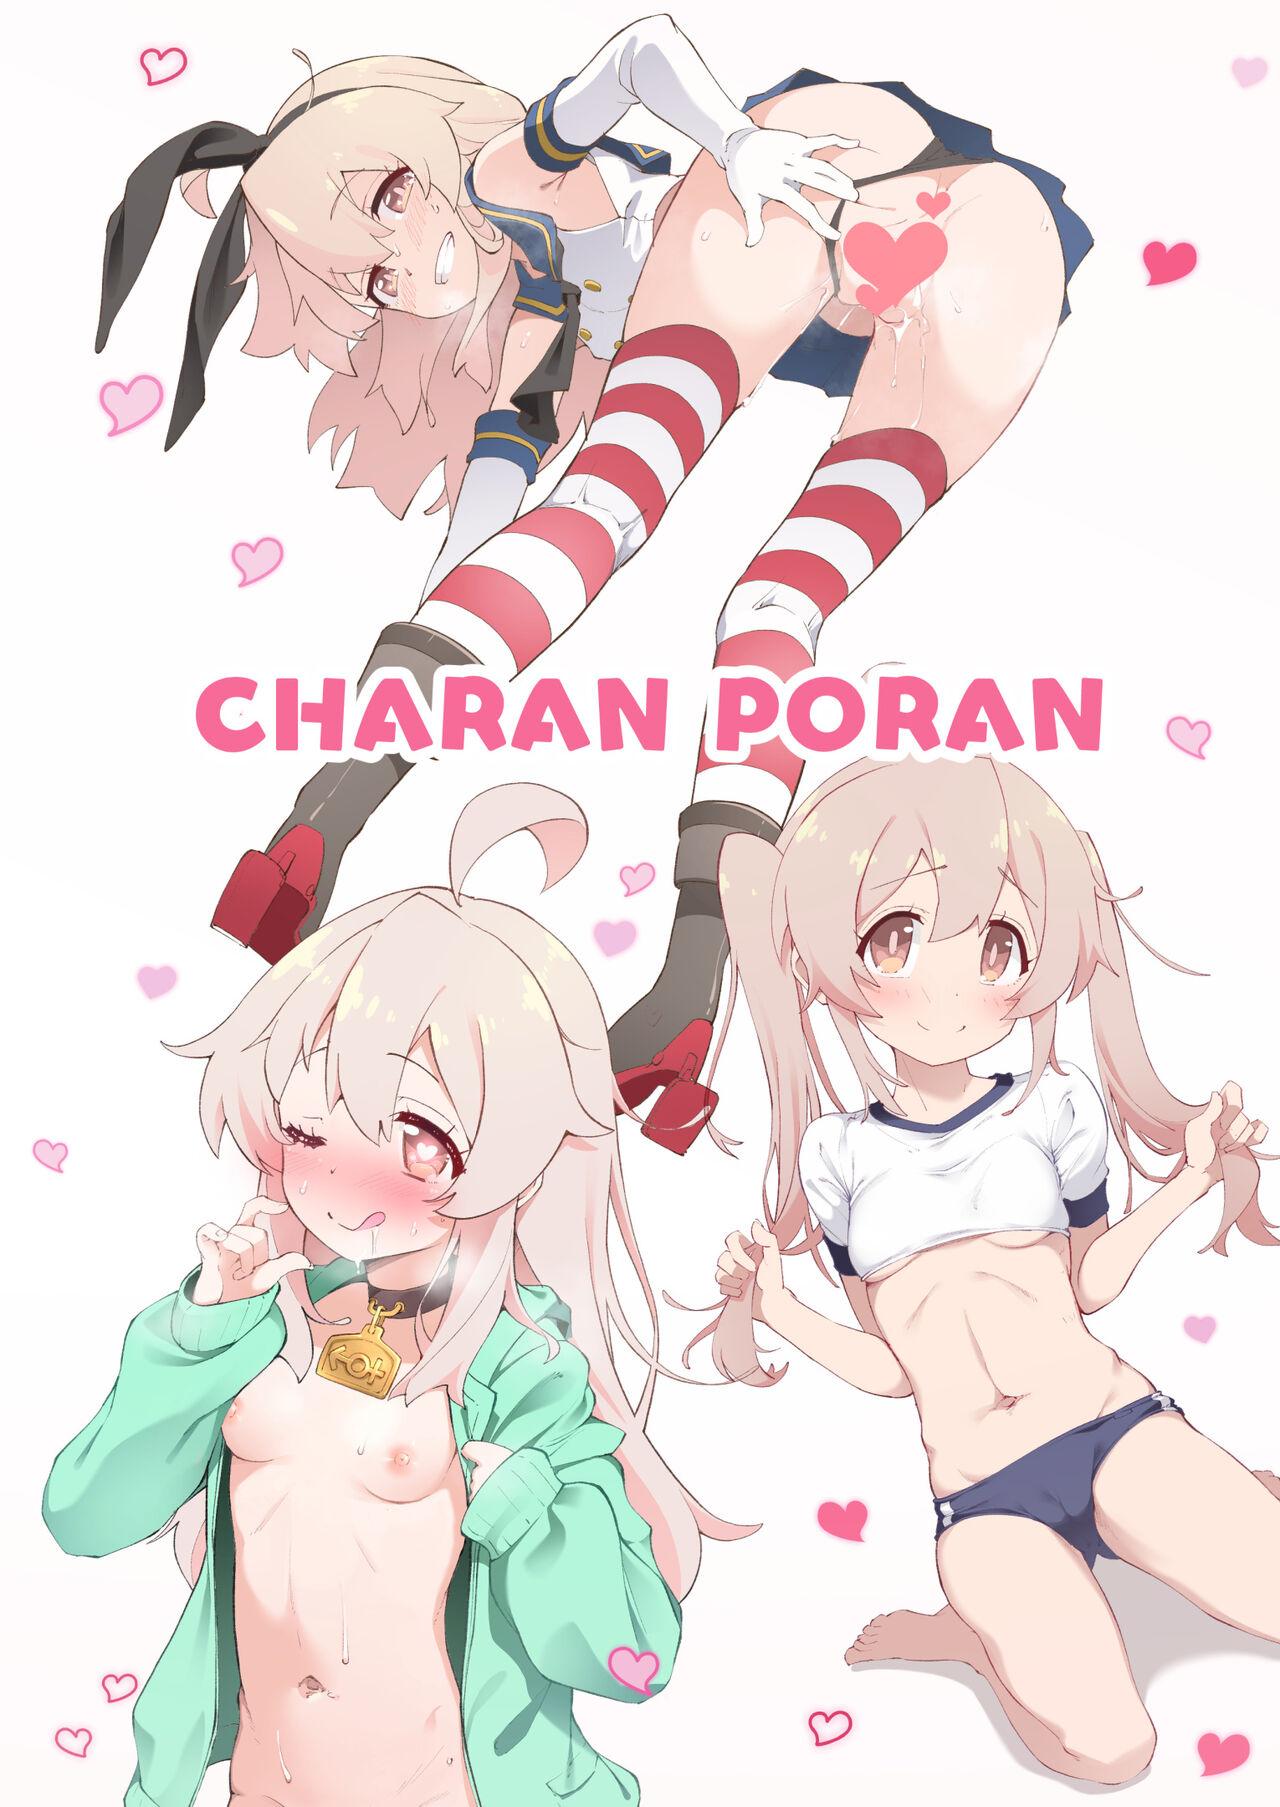 Onii-chan turned into a slut so we'll teach him a lesson with these 25